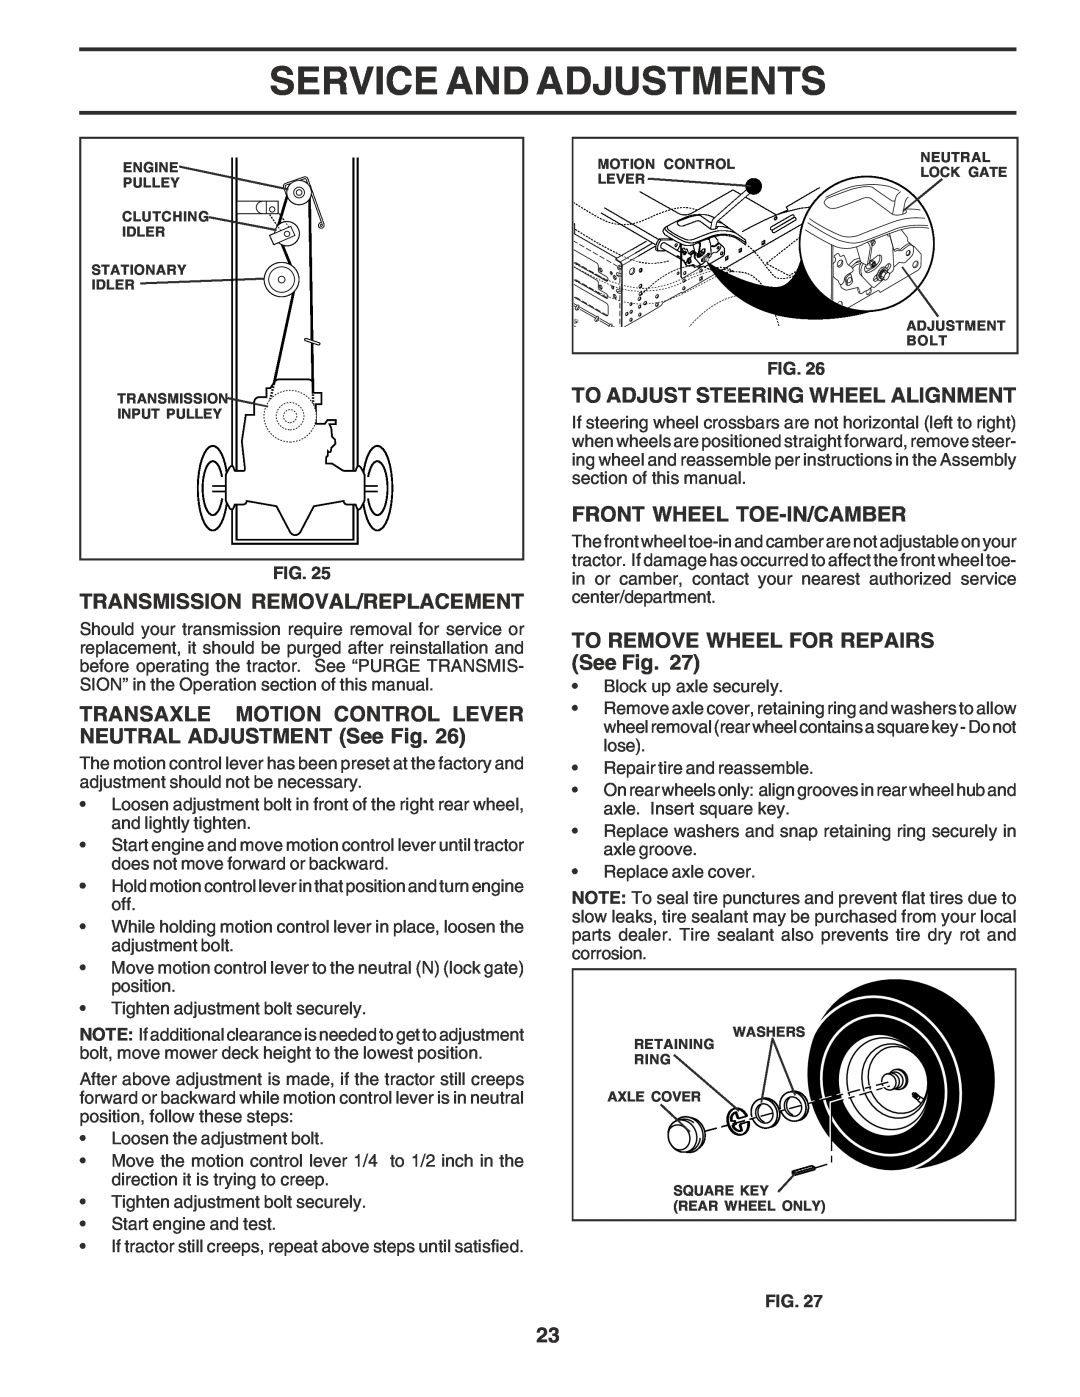 Poulan 182770 owner manual Transmission Removal/Replacement, To Adjust Steering Wheel Alignment, Front Wheel Toe-In/Camber 